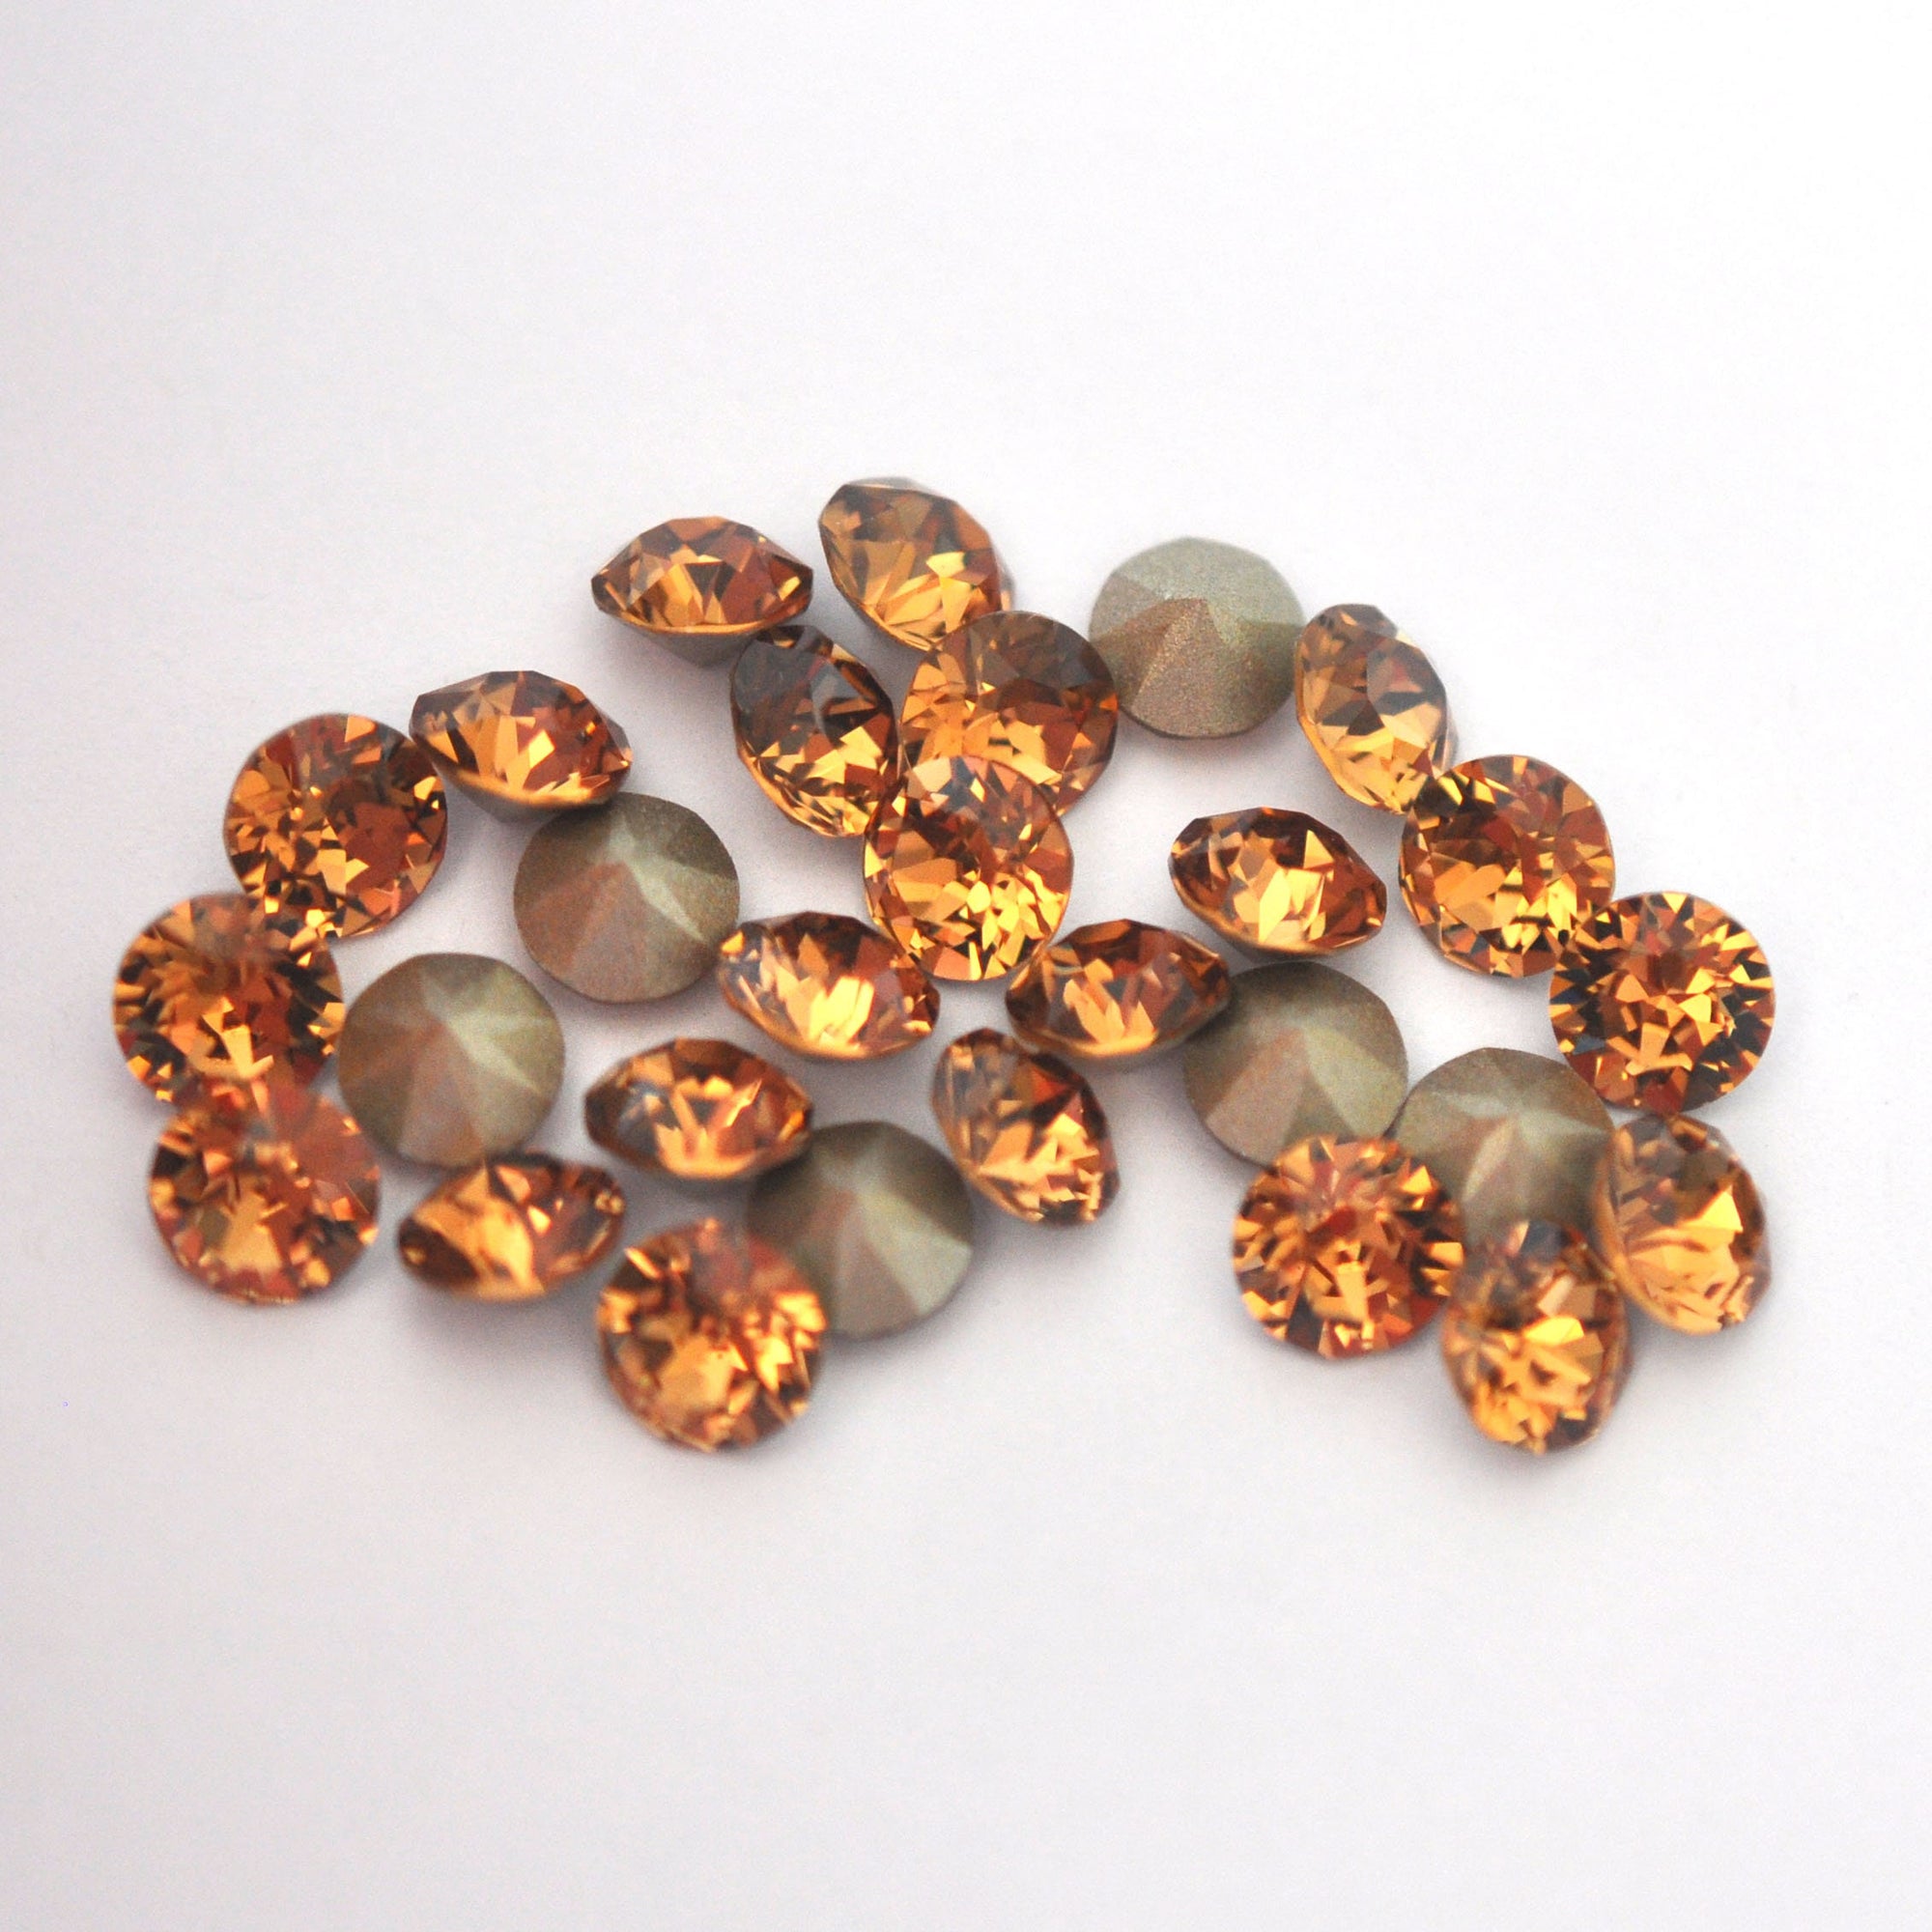 Light Smoked Topaz 1088 Pointed Back Chaton Barton Crystal 29ss, 6mm